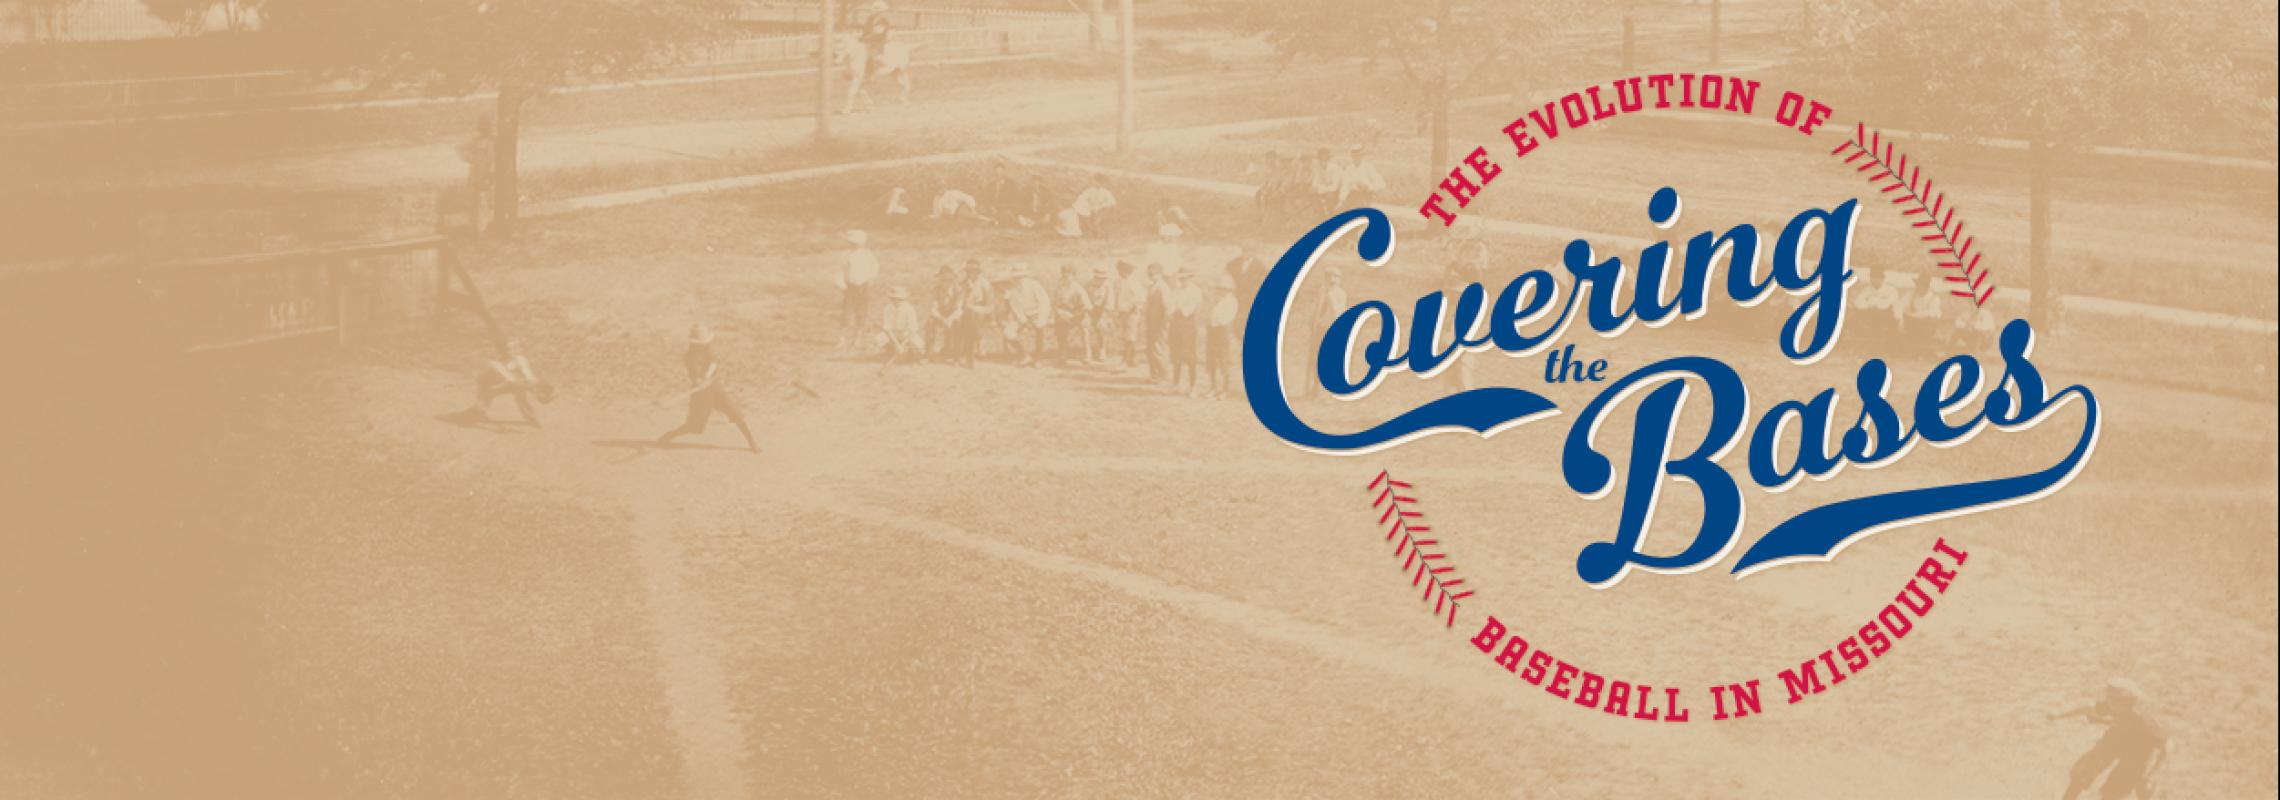 Covering the Bases: Evolution of Baseball in Missouri Exhibition